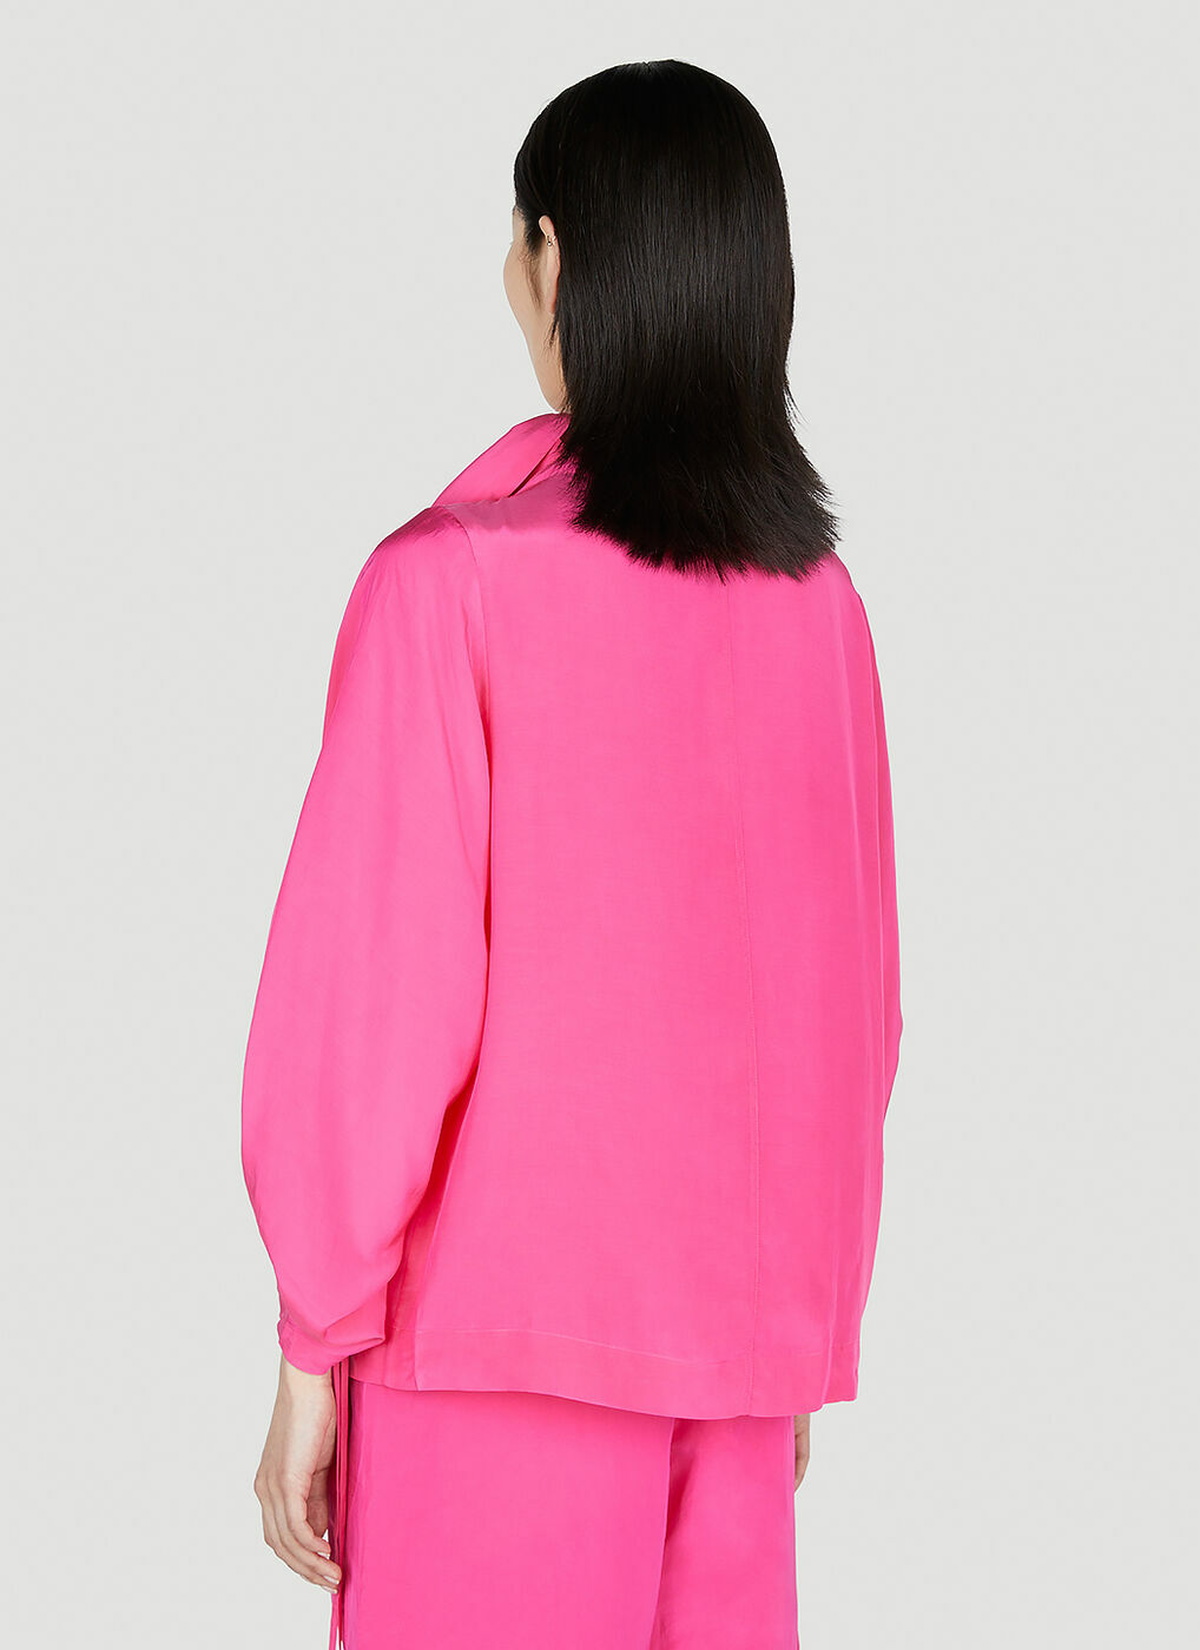 Rodebjer - Mona Drapy Blouse in Pink Rodebjer